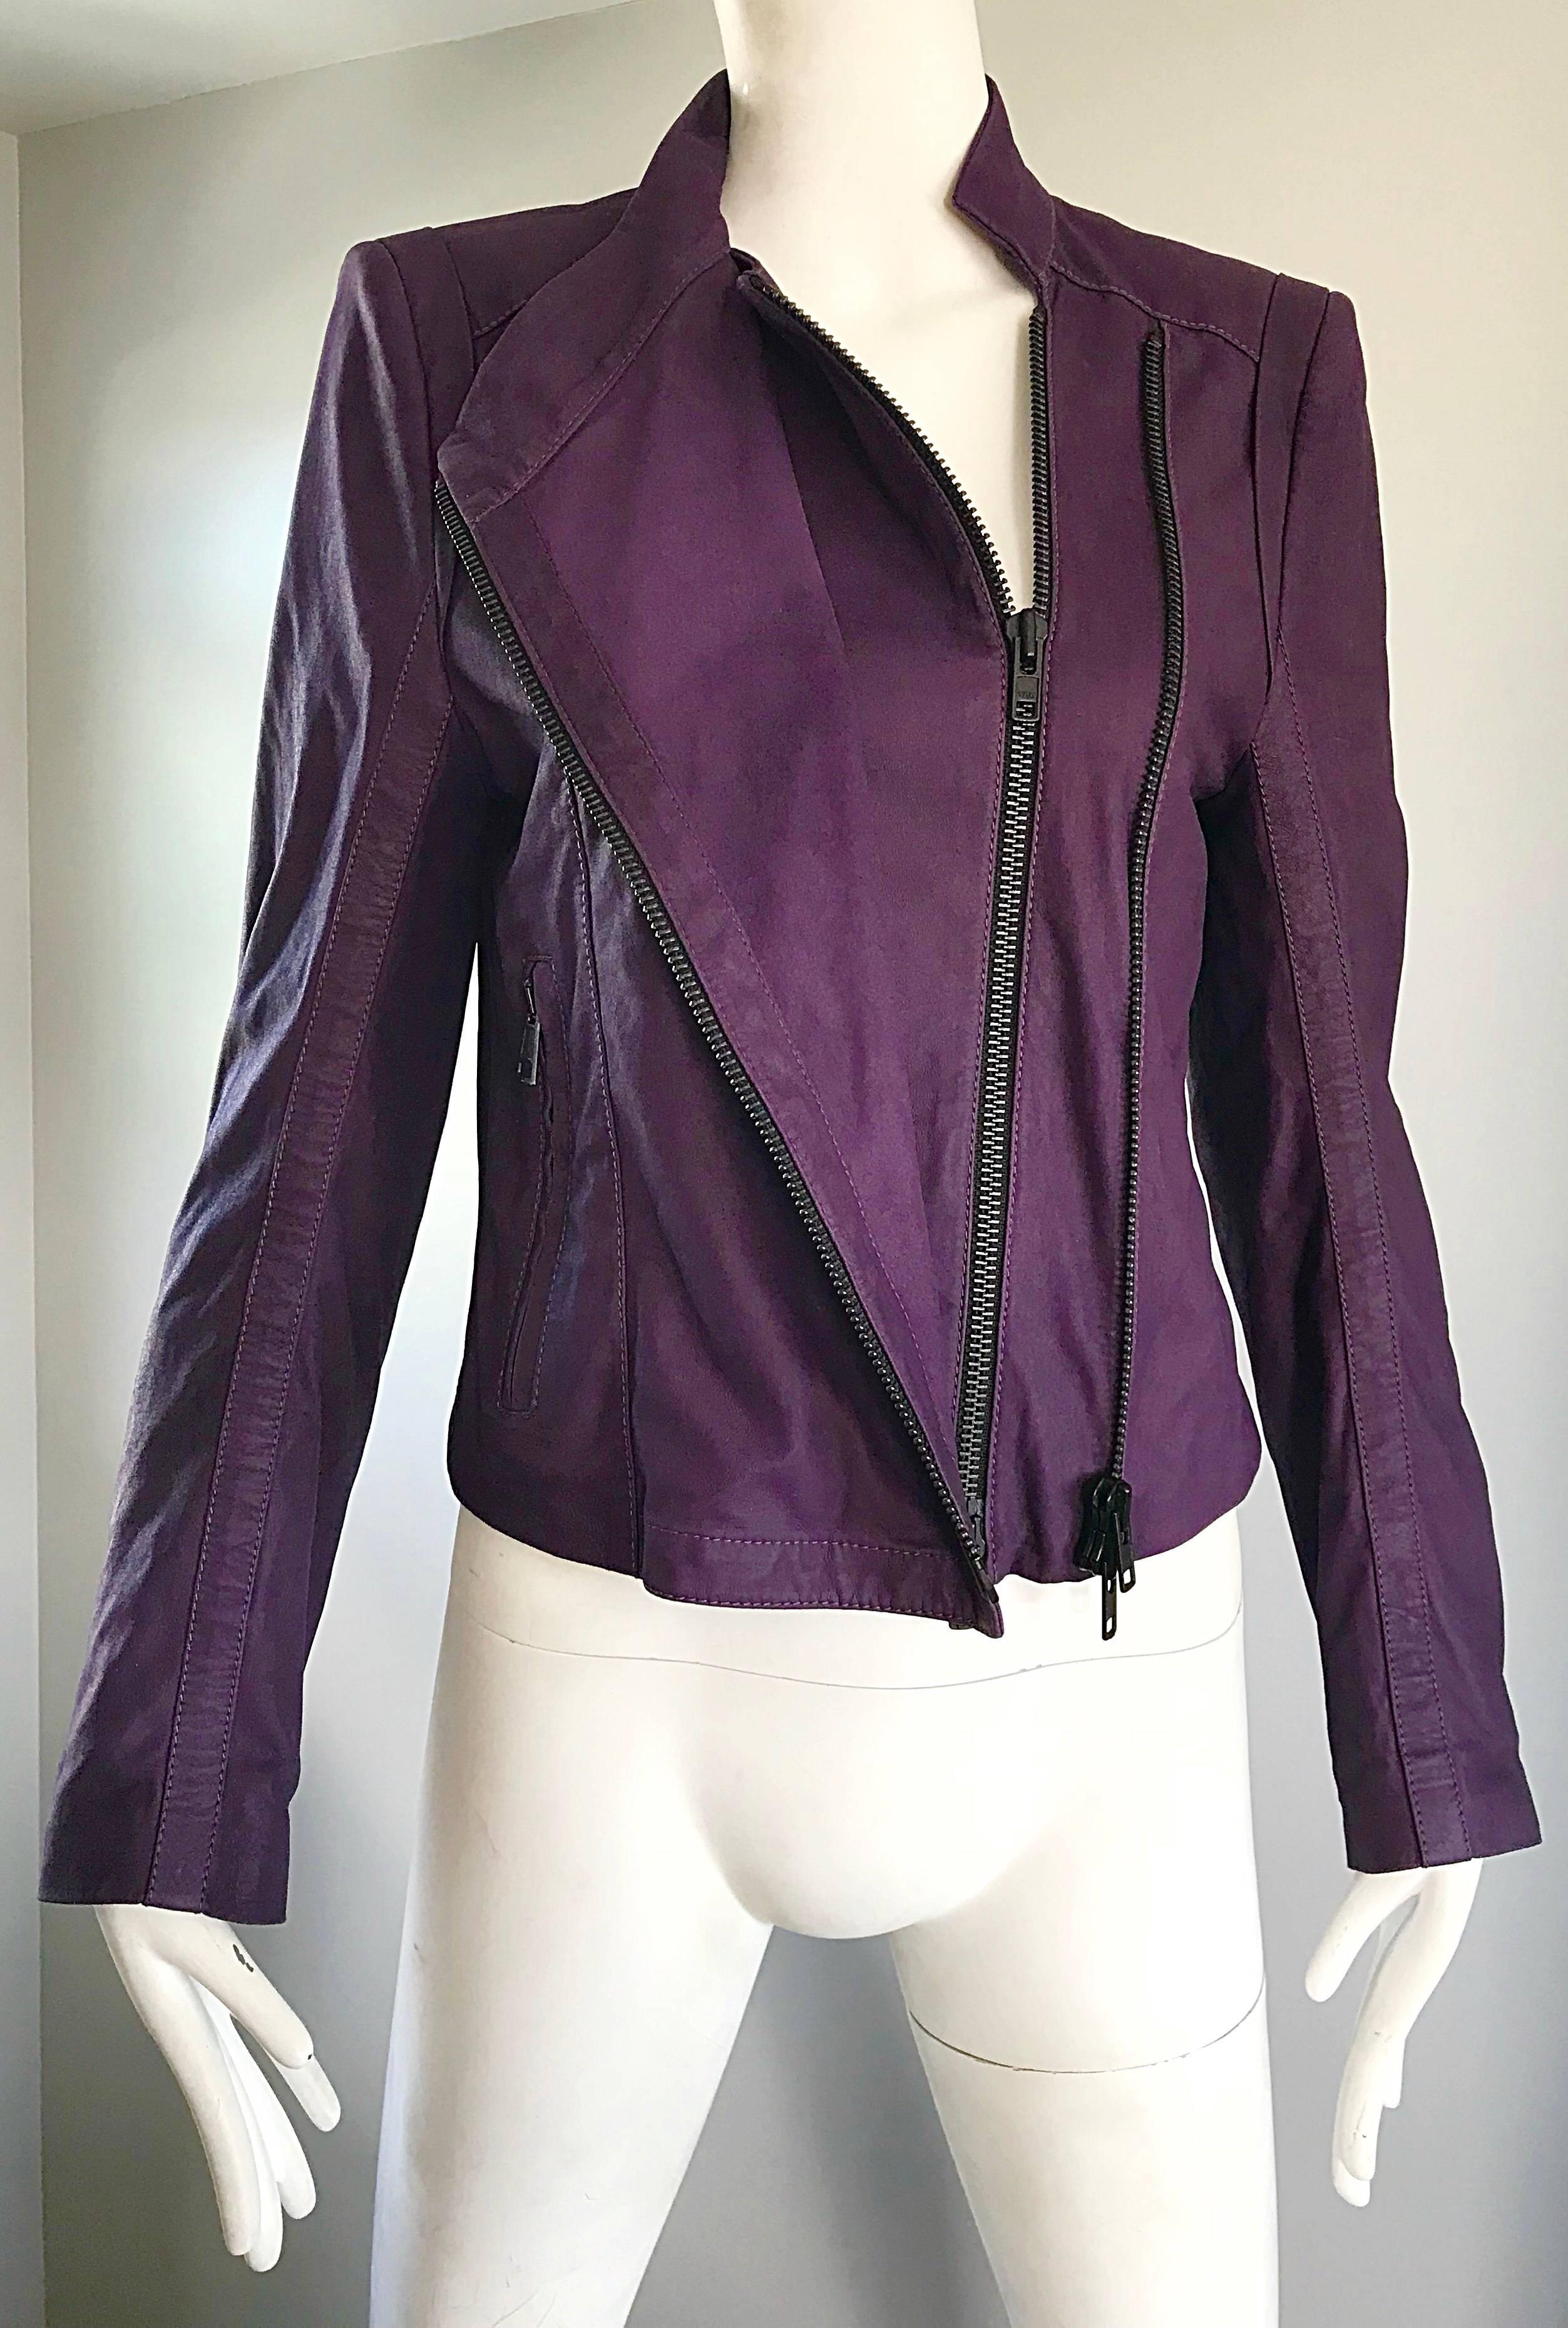 Ann Demeulemeester 1990s Purple Eggplant Leather 90s Fitted Vintage Moto Jacket For Sale 1